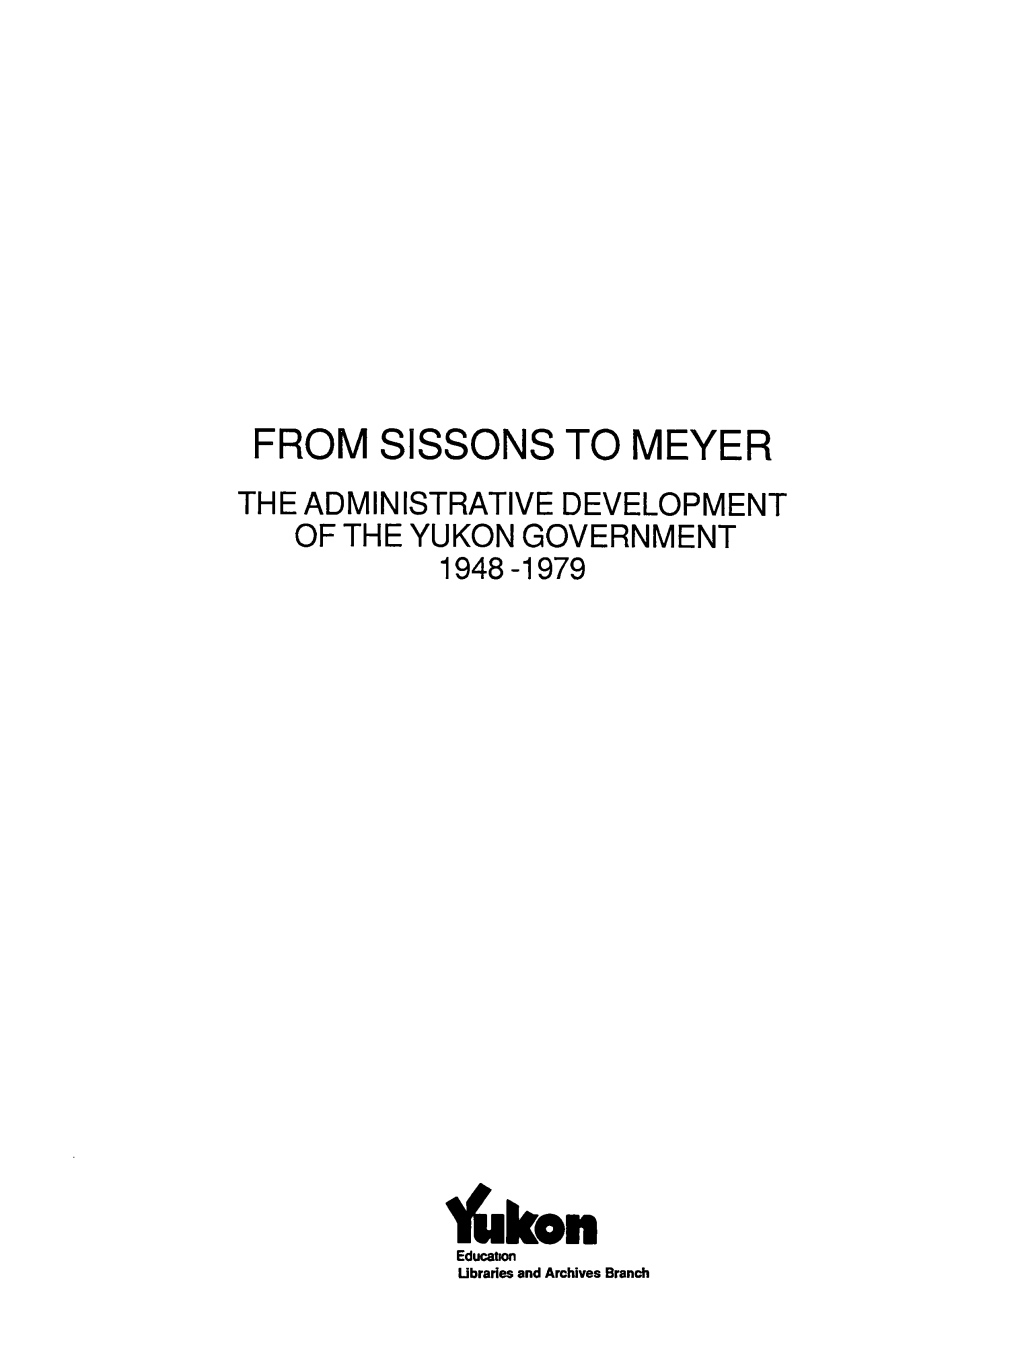 From Sissons to Meyer the Administrative Development Oftheyukongovernment 1948-1979